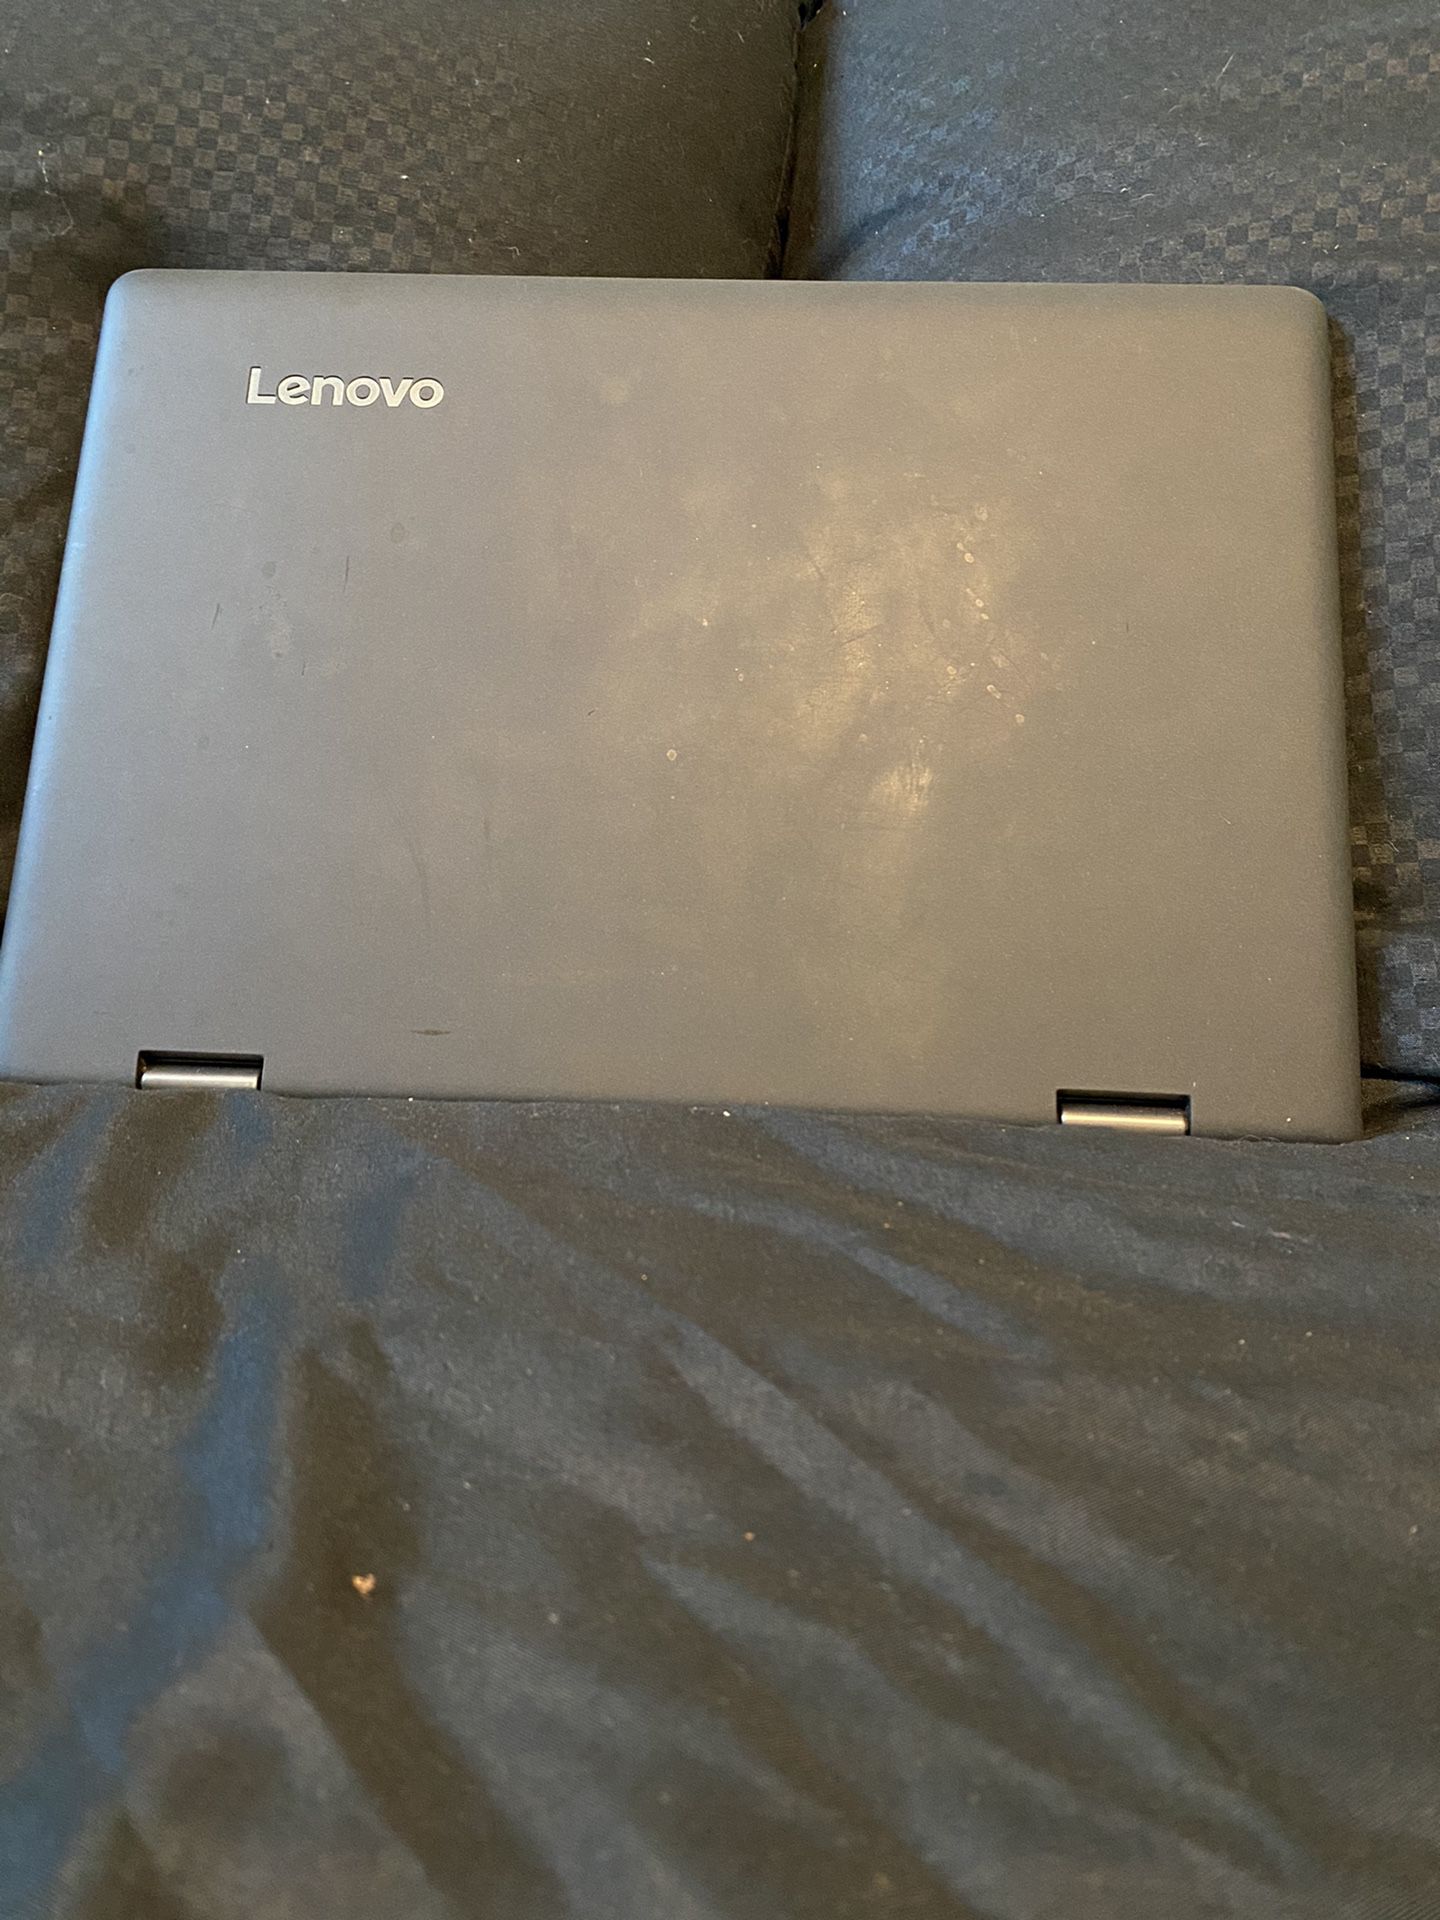 Price Reduction! Lenovo 2in1 10” Laptop (perfect working condition/gently used)